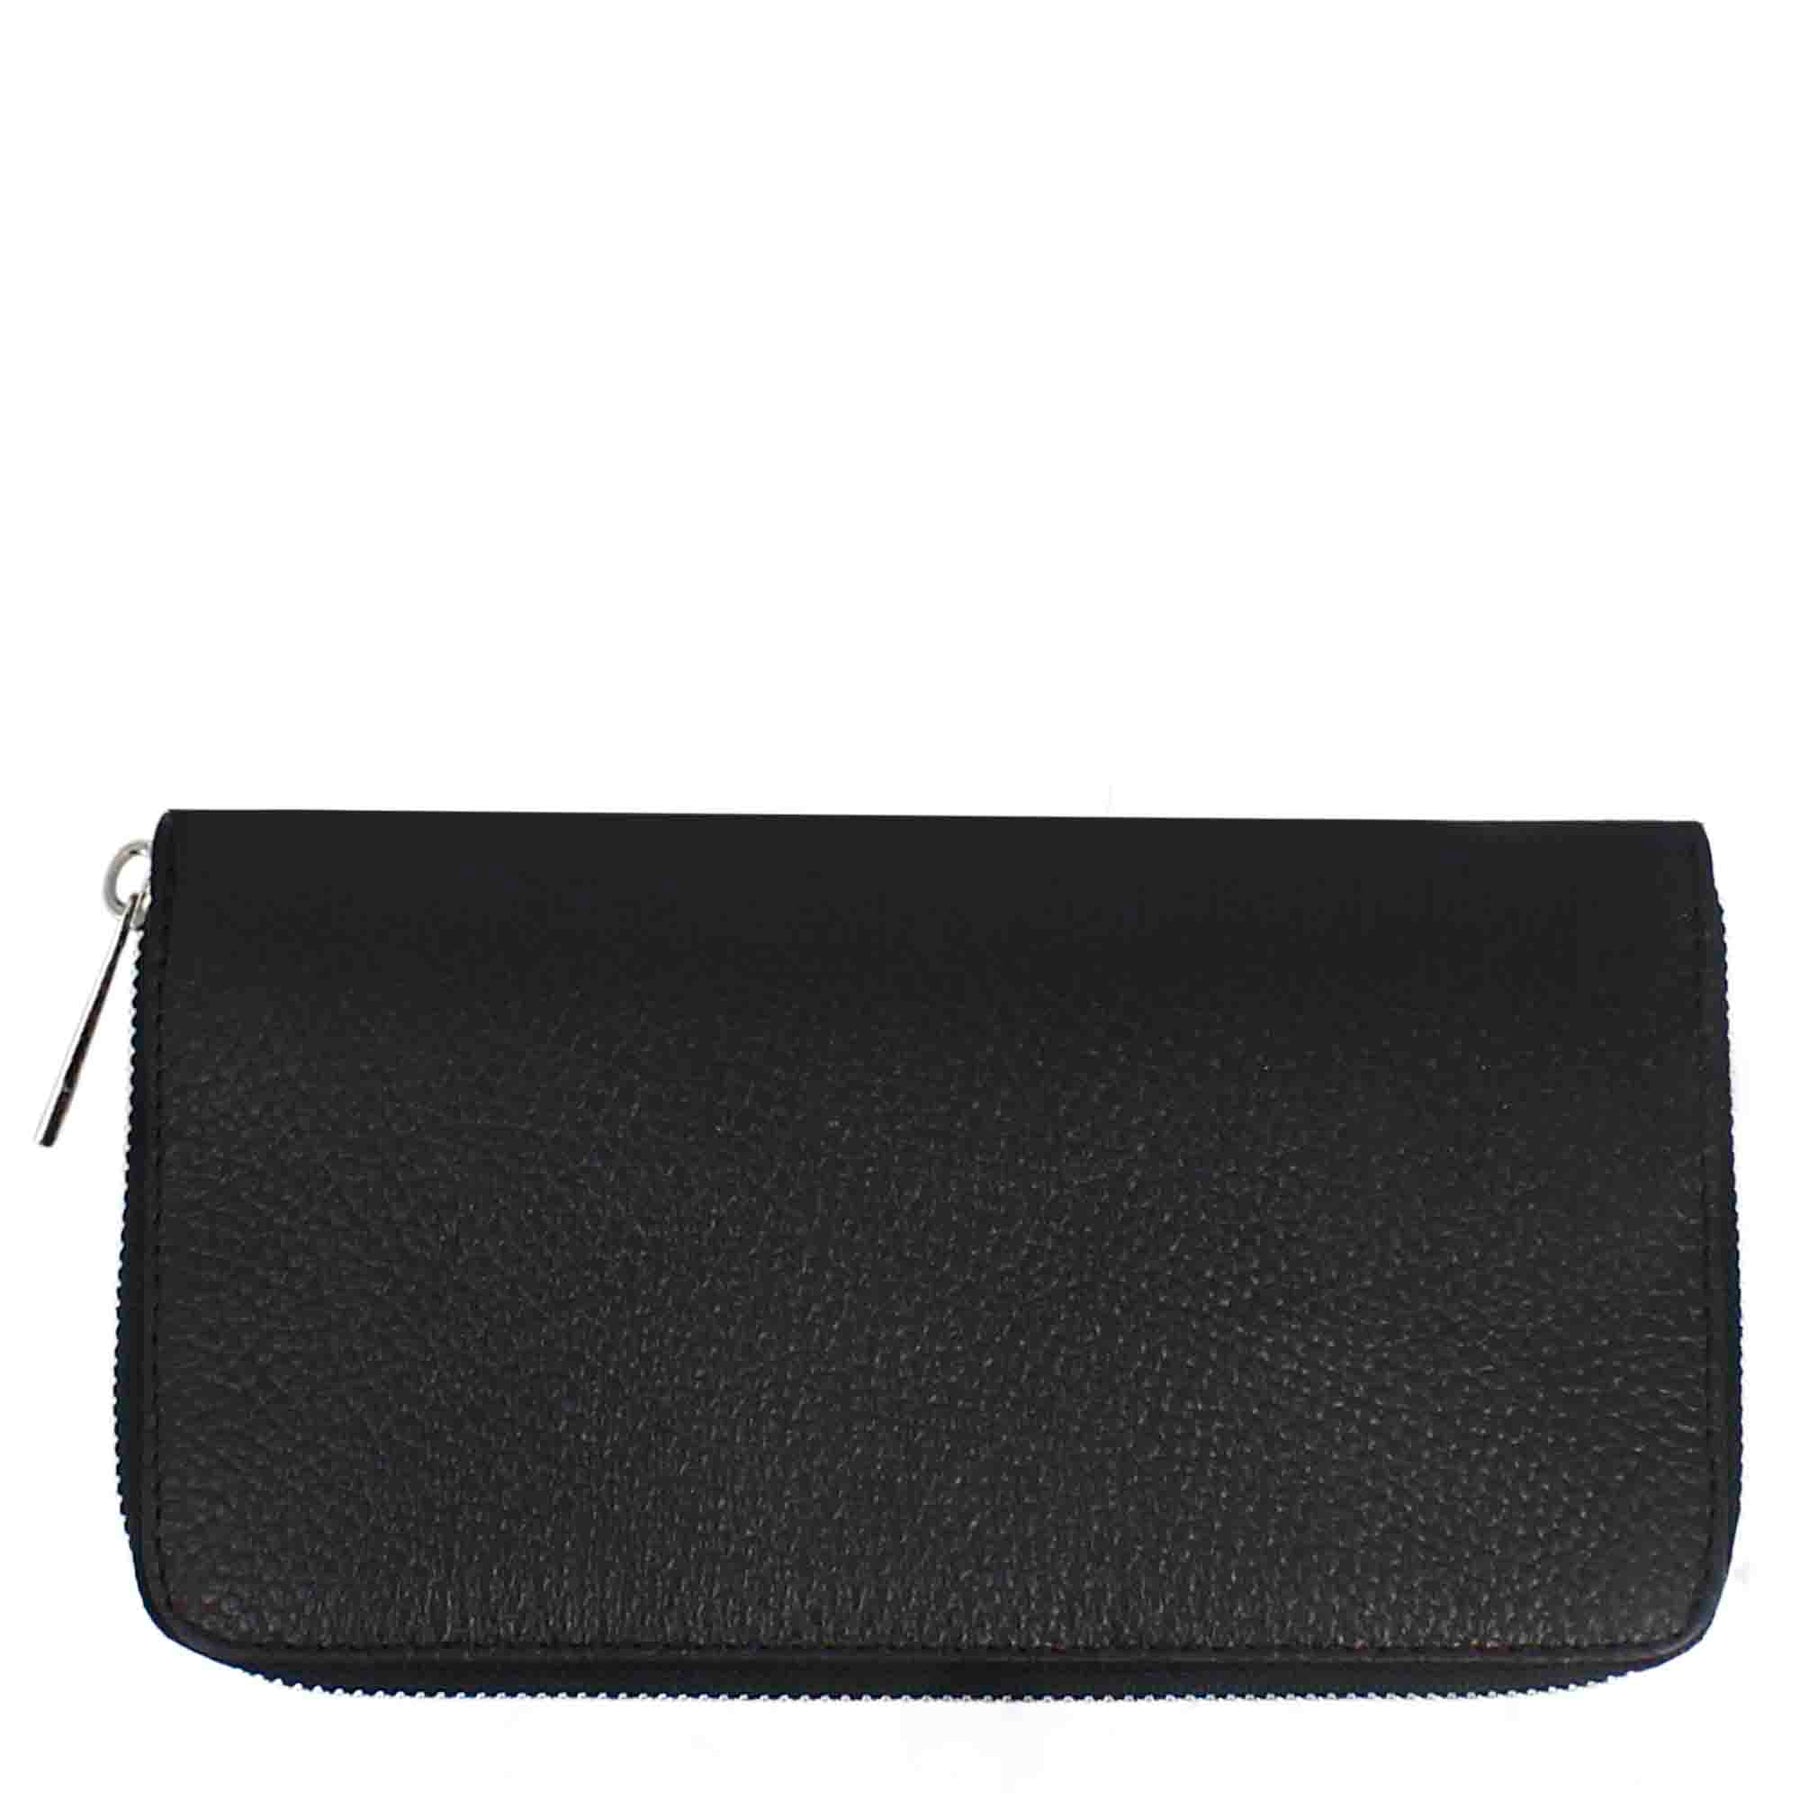 Large women's leather wallet with zip